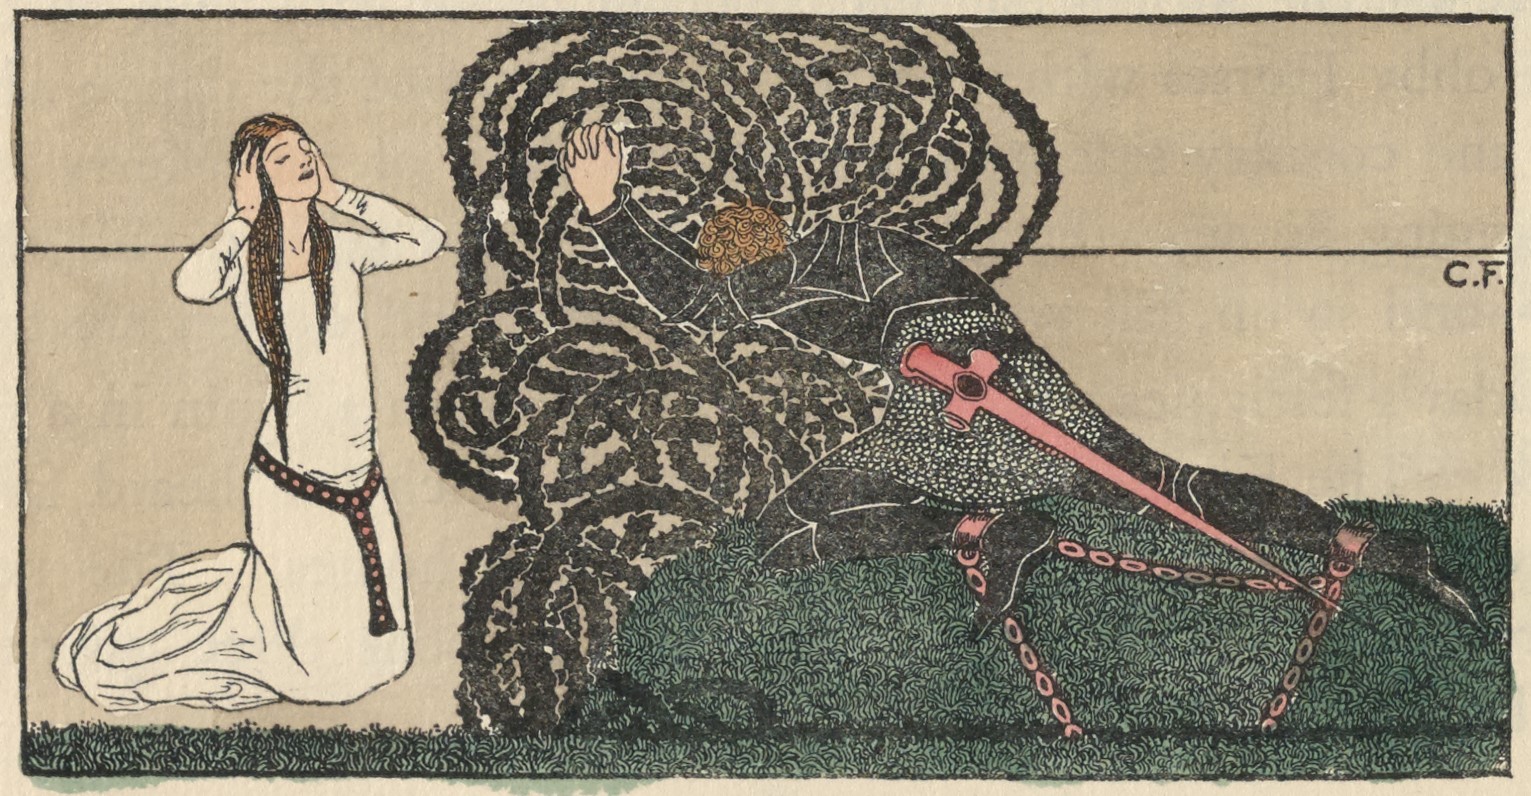 The hand-coloured tailpiece is centered on the page, below the text of the poem. The image is framed with a rectangular black border, horizontally oriented. The image depicts two figures separated by tangled black brambles. On the left, a pale woman kneels, holding her hands to her ears, her eyes closed. She wears a long, white medieval dress with a brown belt, and her hair is long and brown. On the right, a knight kneels forward on a green hill toward the brambles, his hands outstretched in prayer. His legs, stretched behind him, are shackled in red chains and manacles. He wears black armour and has a red sword at his hip. A line of green grass stretches across the bottom border of the frame. The register is slightly off, and the green bleeds a bit outside the frame along the bottom of the image. The artist’s monogram is at the mid right edge of the image.